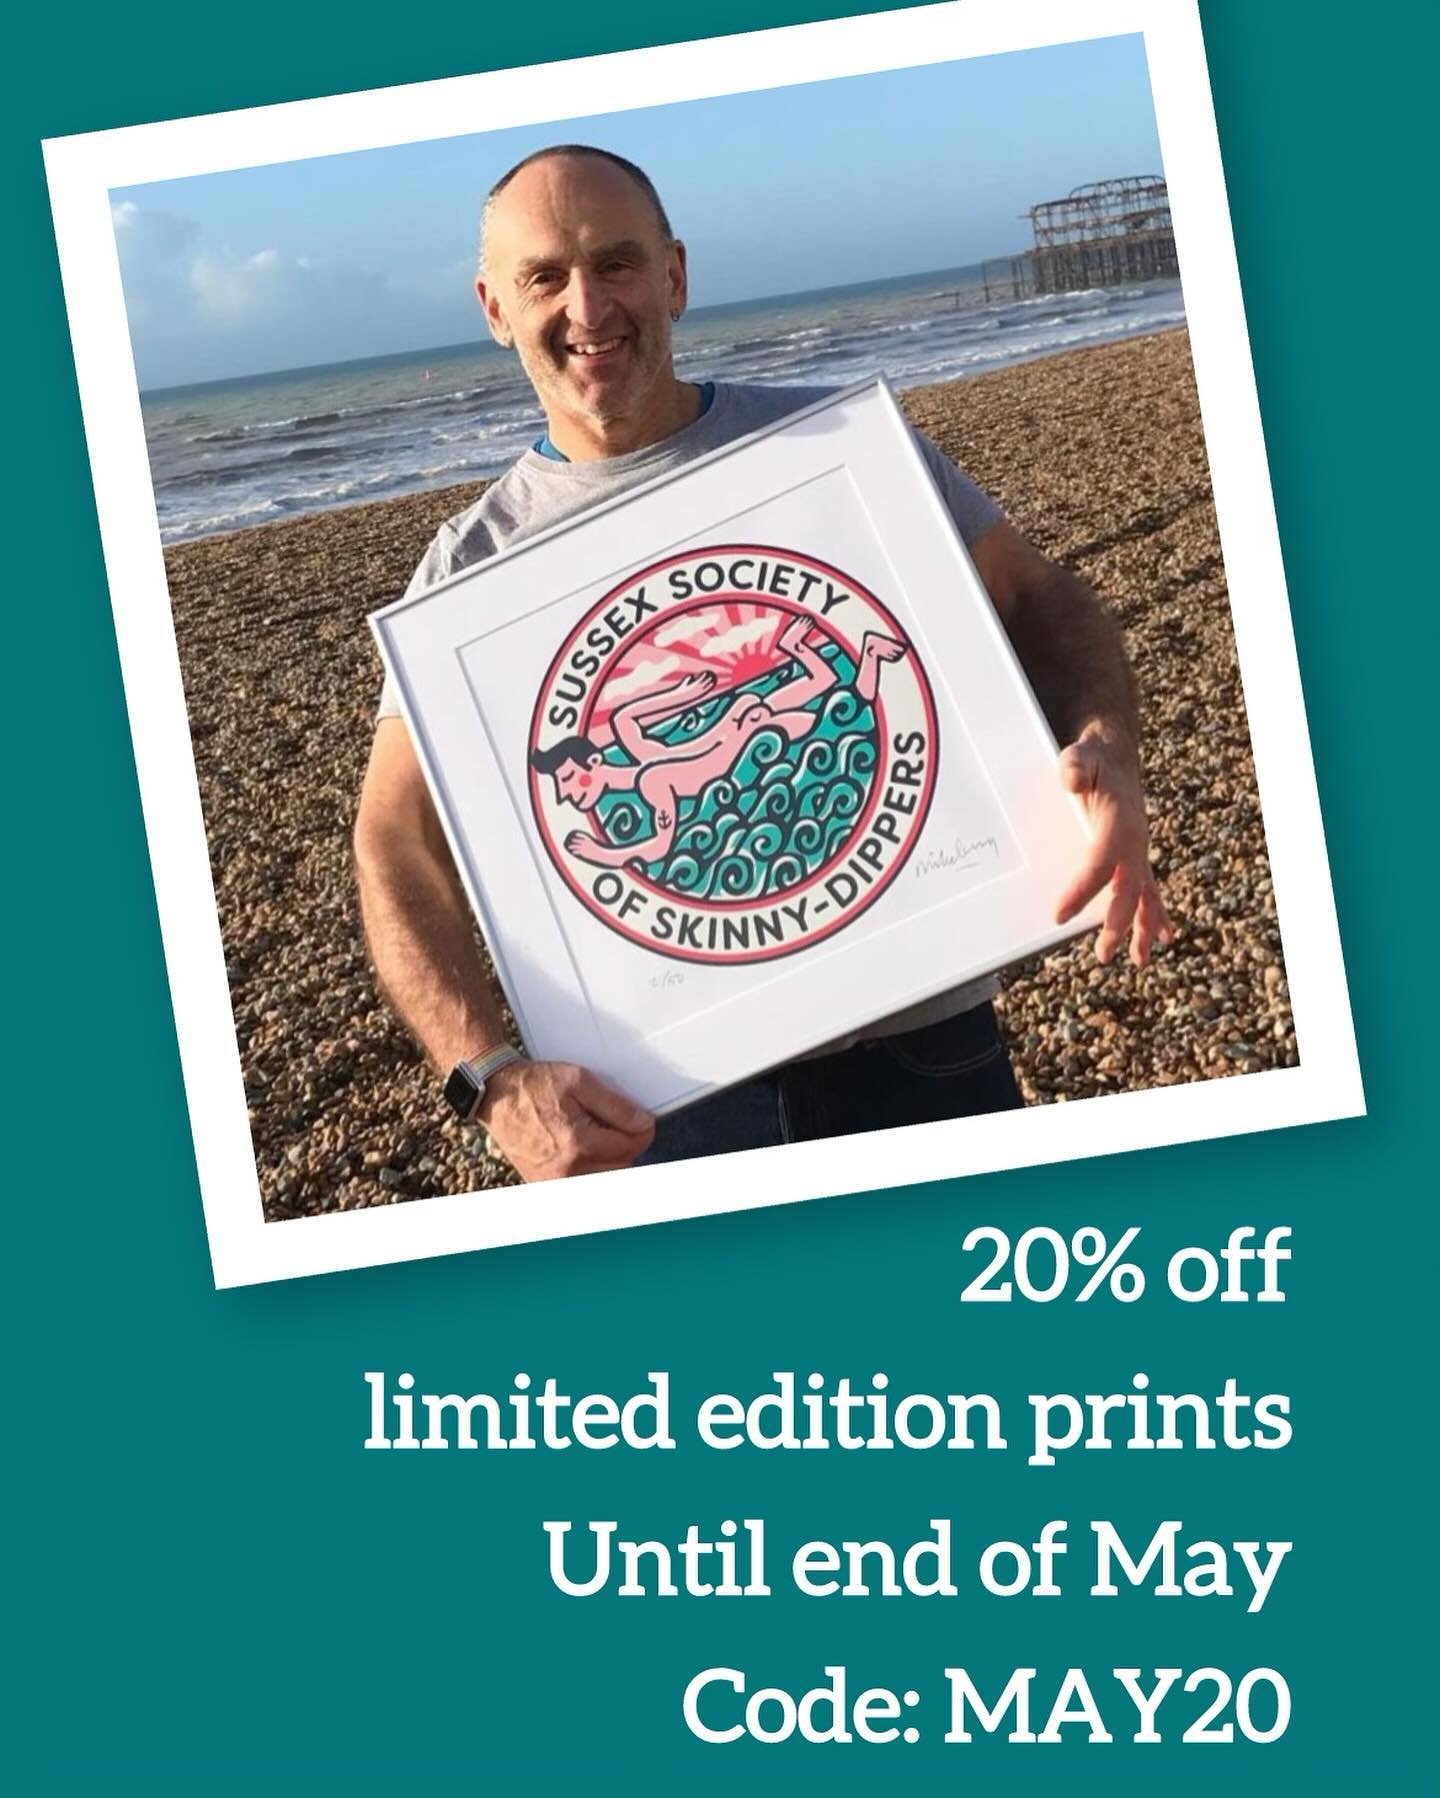 Headsup, there&rsquo;s 20% discount on my limited edition prints on the webshop through until end of May. Just a couple of this Sussex Society of Skinnydippers left in the drawer.
.
#handmade #print #limitededition #skinnydip